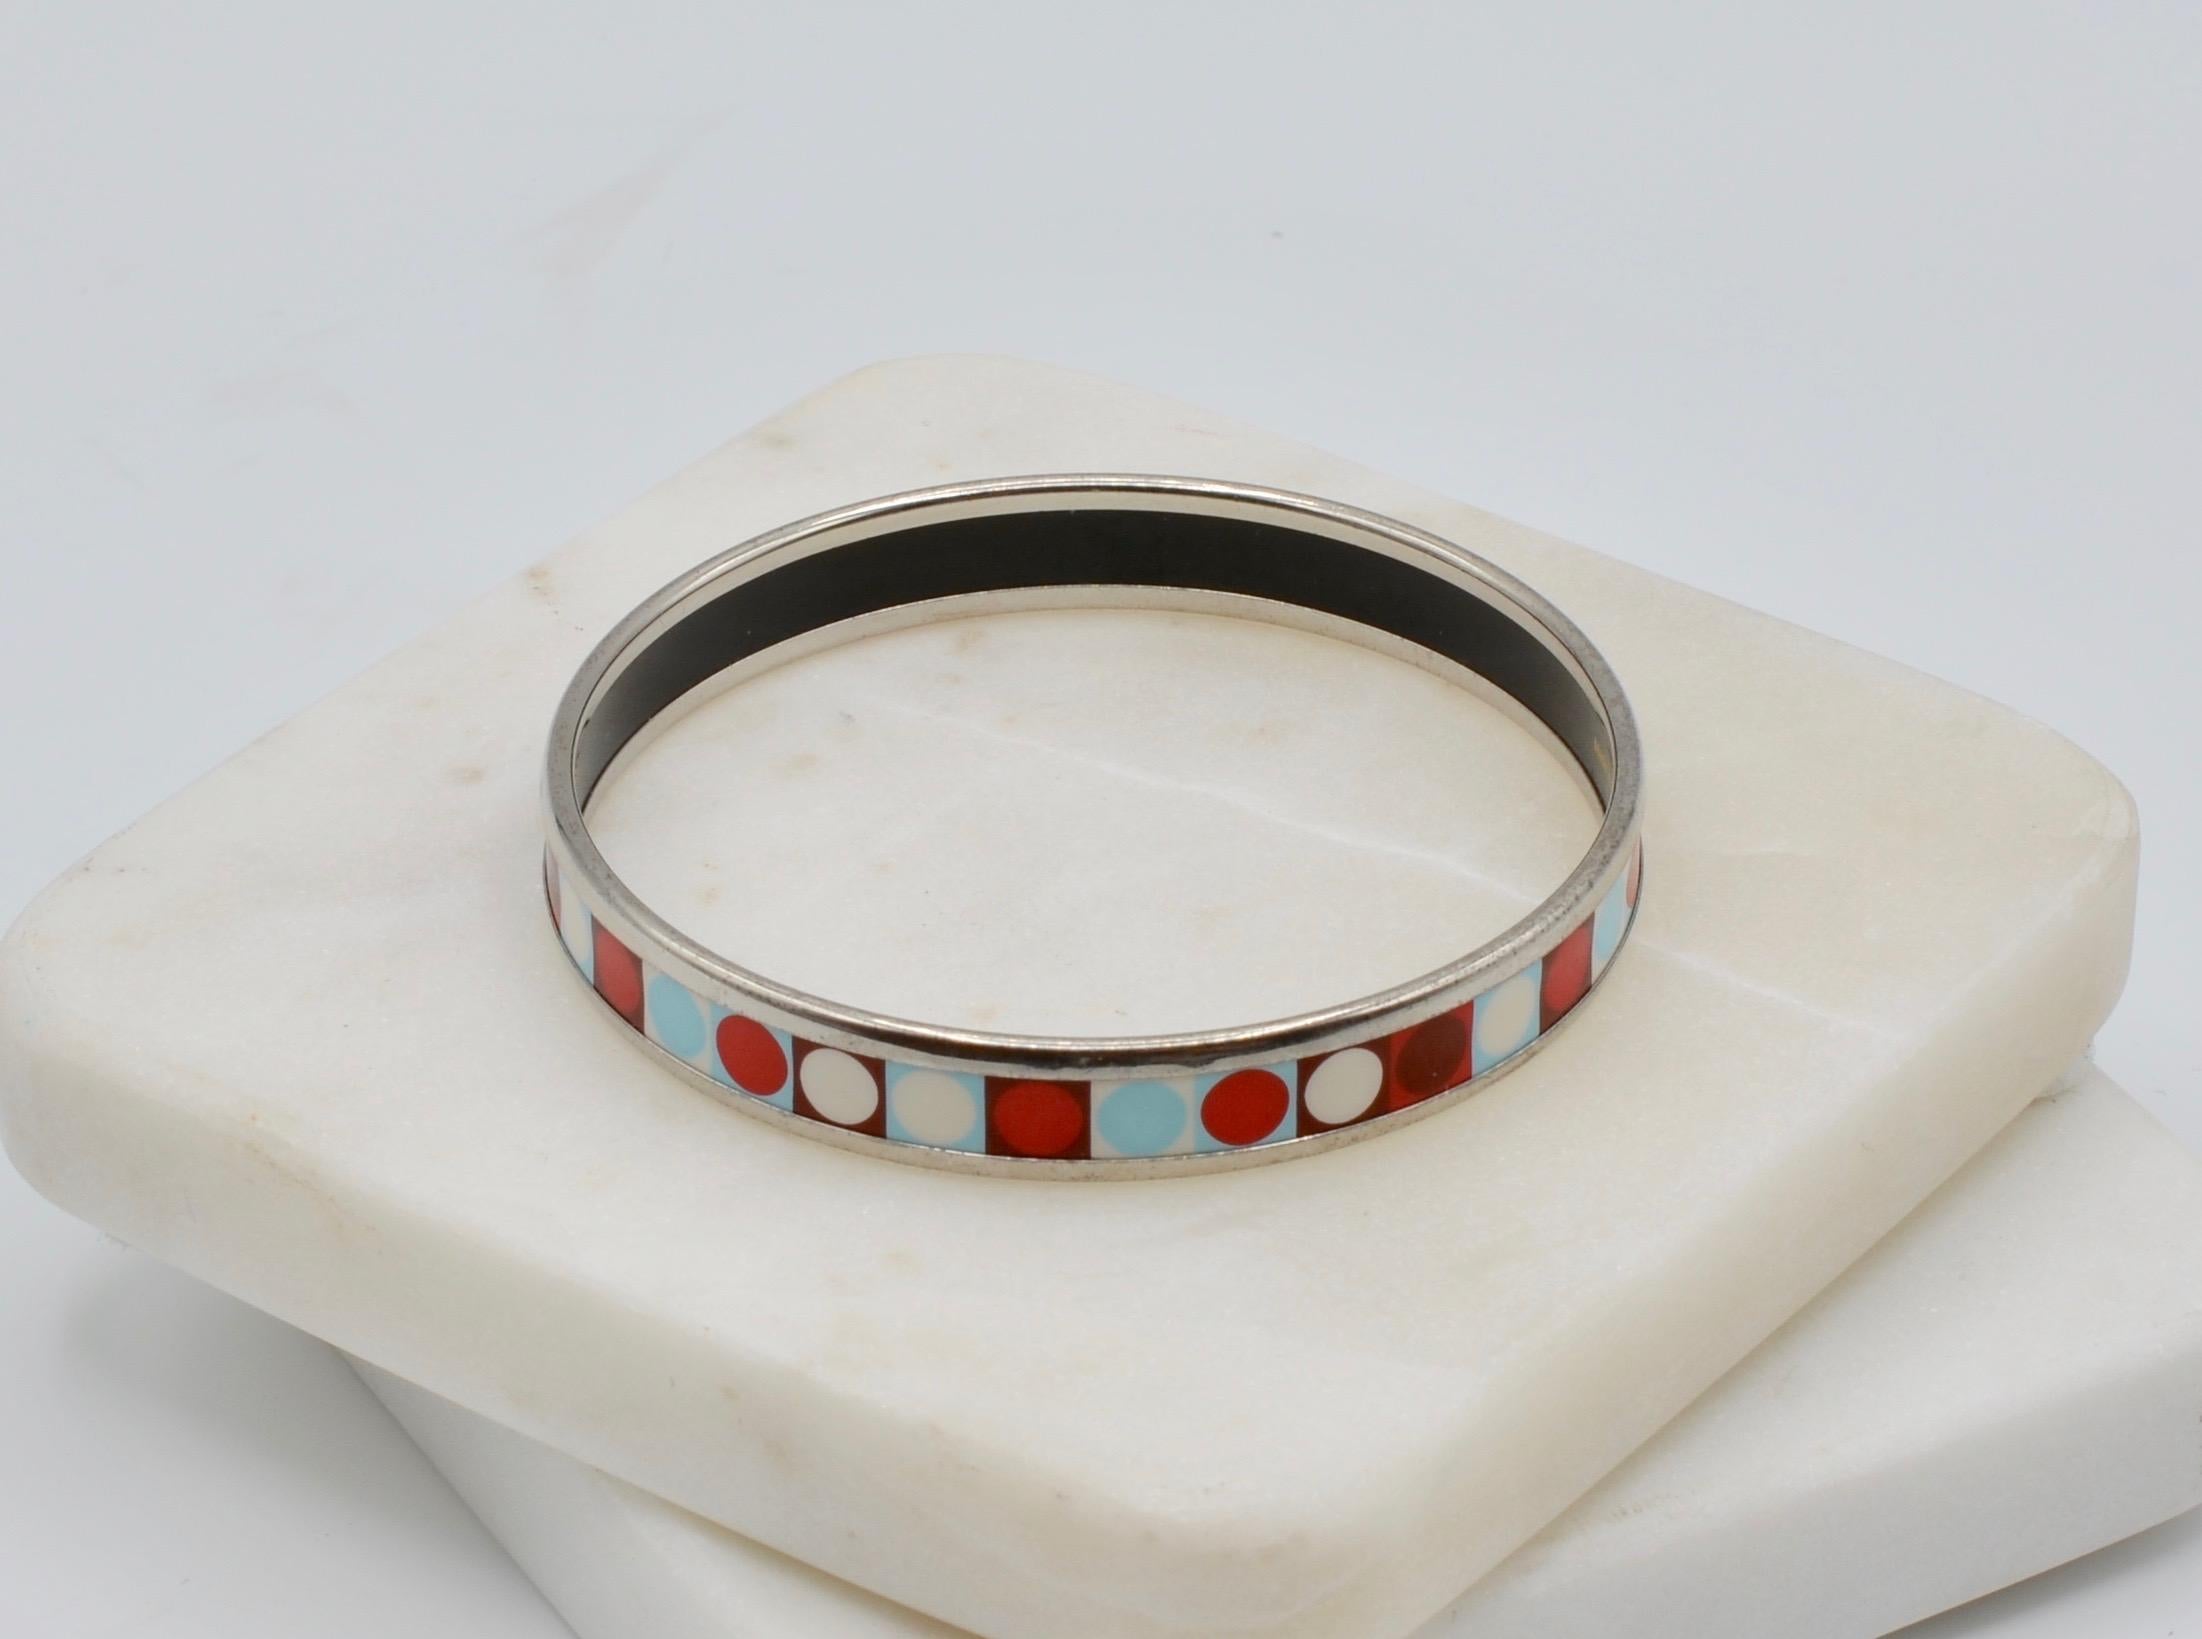 This beautiful bangle has a Modern Dot pattern in shades of reds and blues. The inside circumference measures 7 1/2